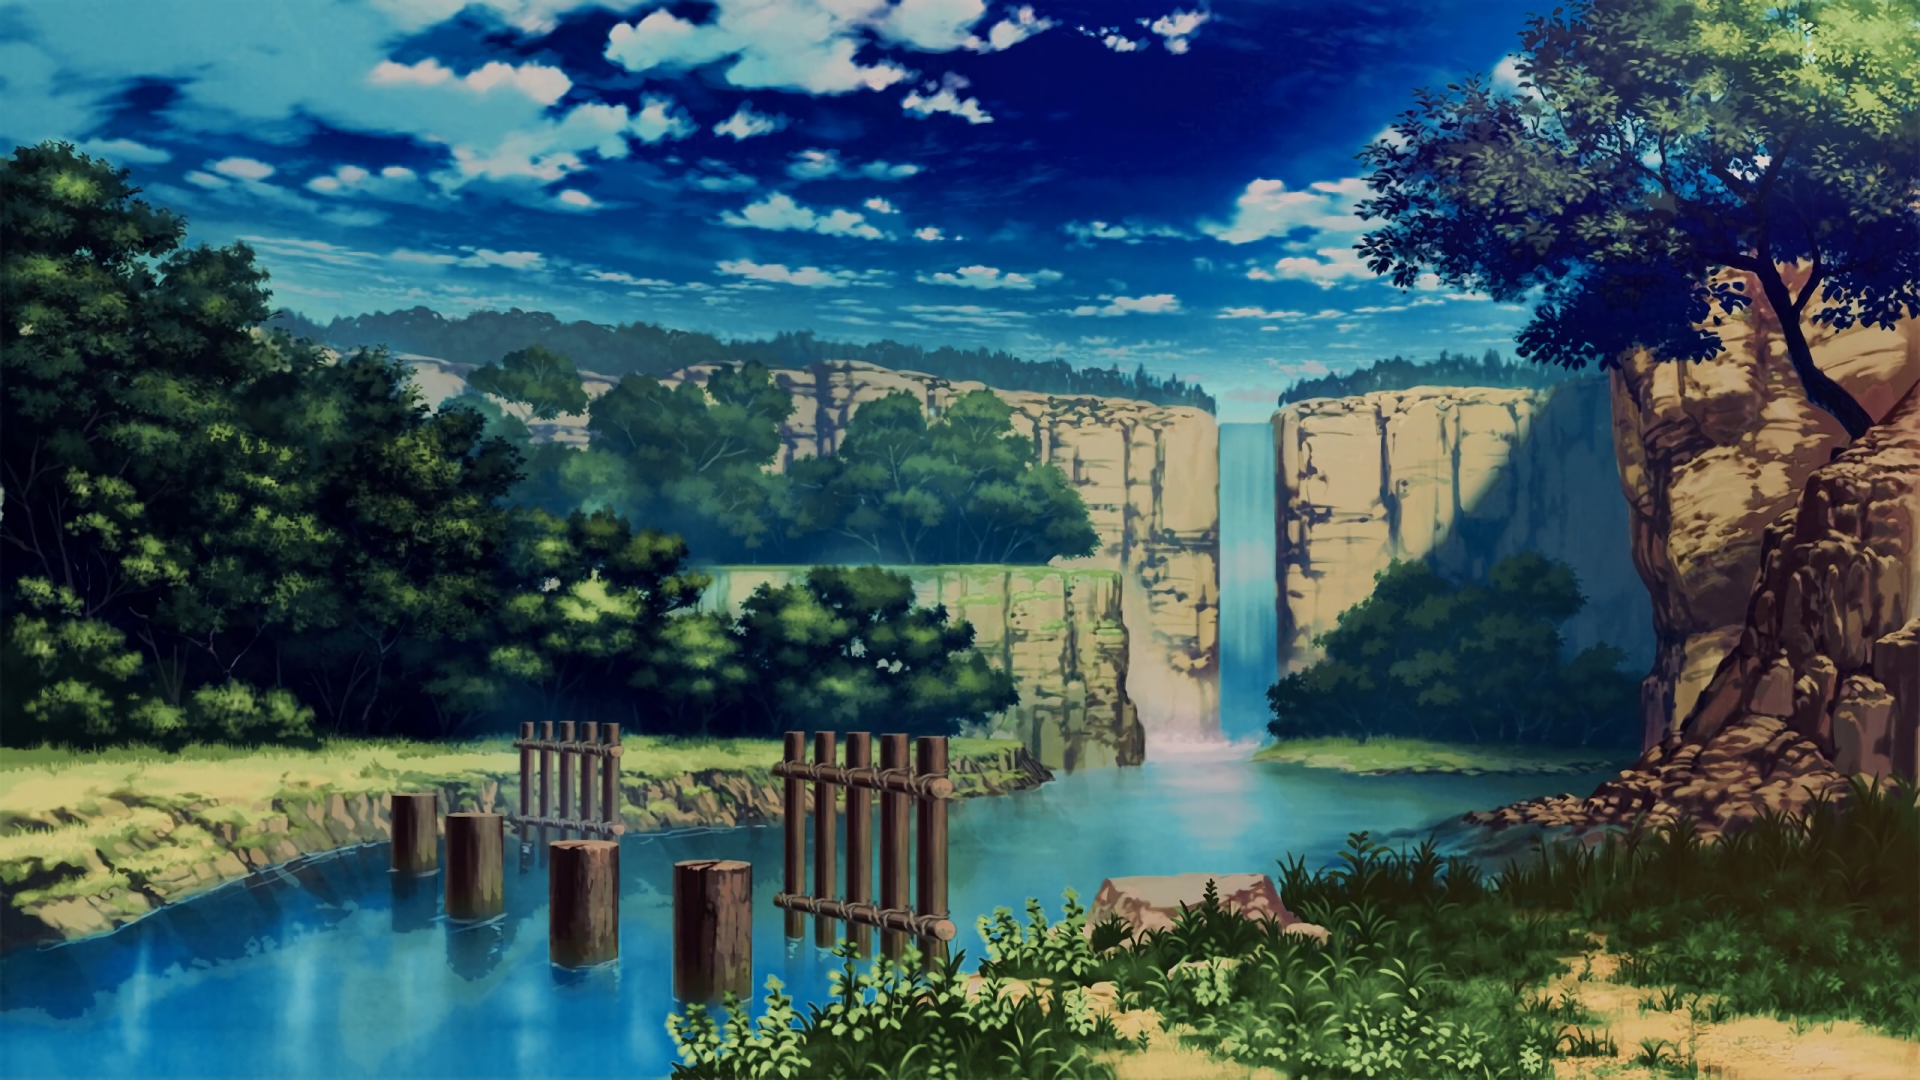 Desktop wallpaper anime river waterfall nature hd image picture background sm qs